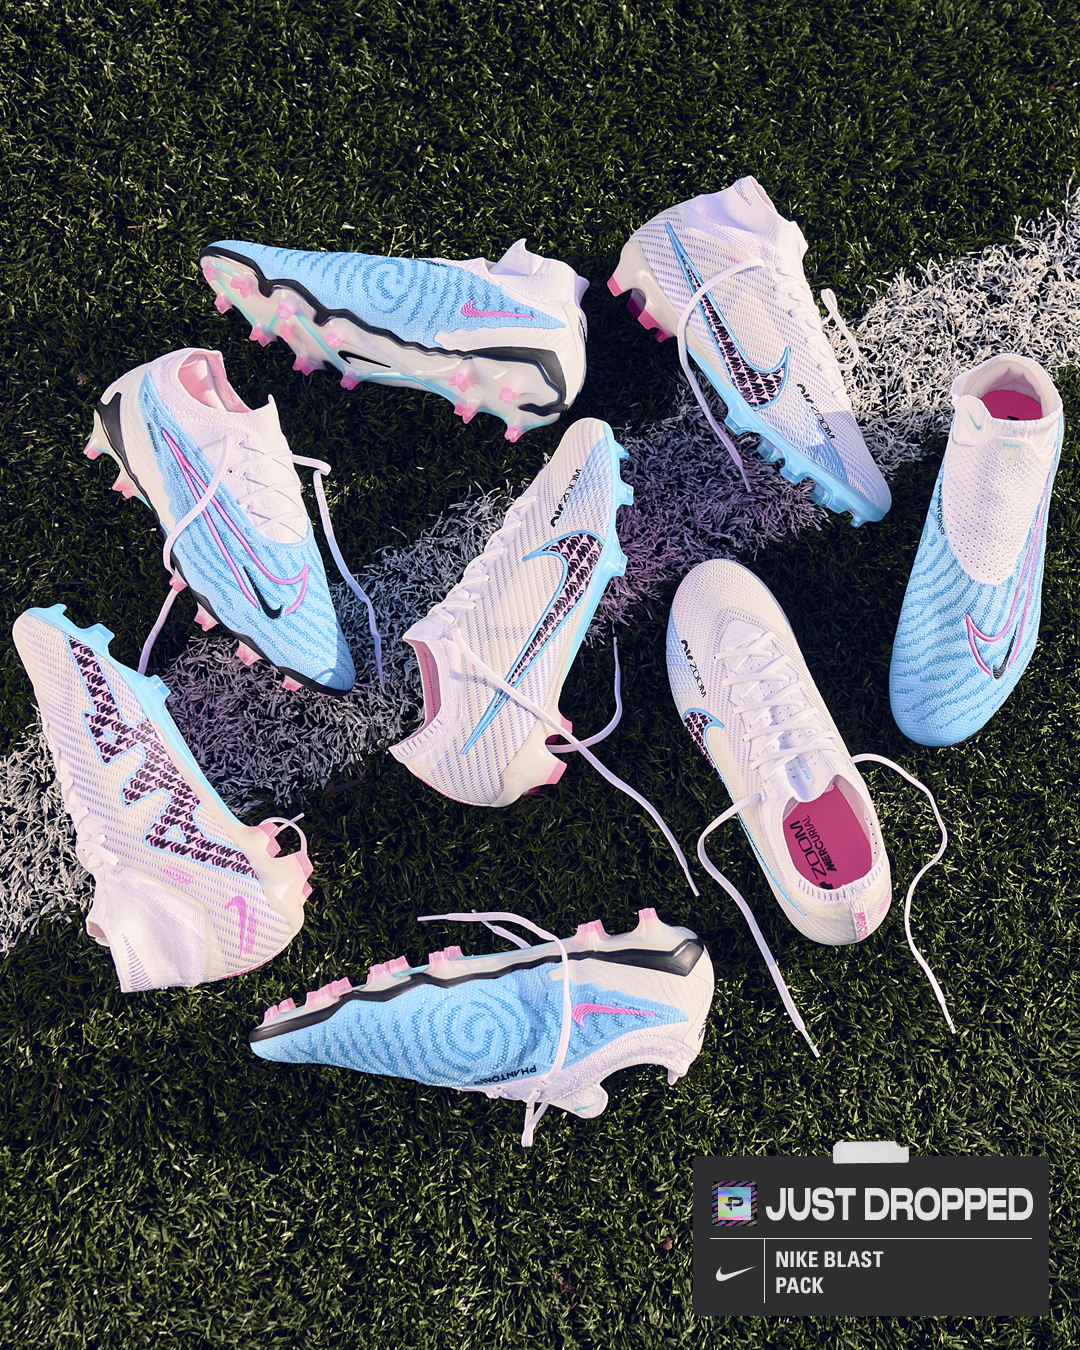 Pro:Direct Soccer on X: "Shop now 🔥 https://t.co/UgnouhPeKs The Nike Blast  Pack is available now at Pro:Direct Soccer 👀 The Phantom GX & Mercurial  series are refreshed for 2023 📲 https://t.co/JfvLNmkLvM" /